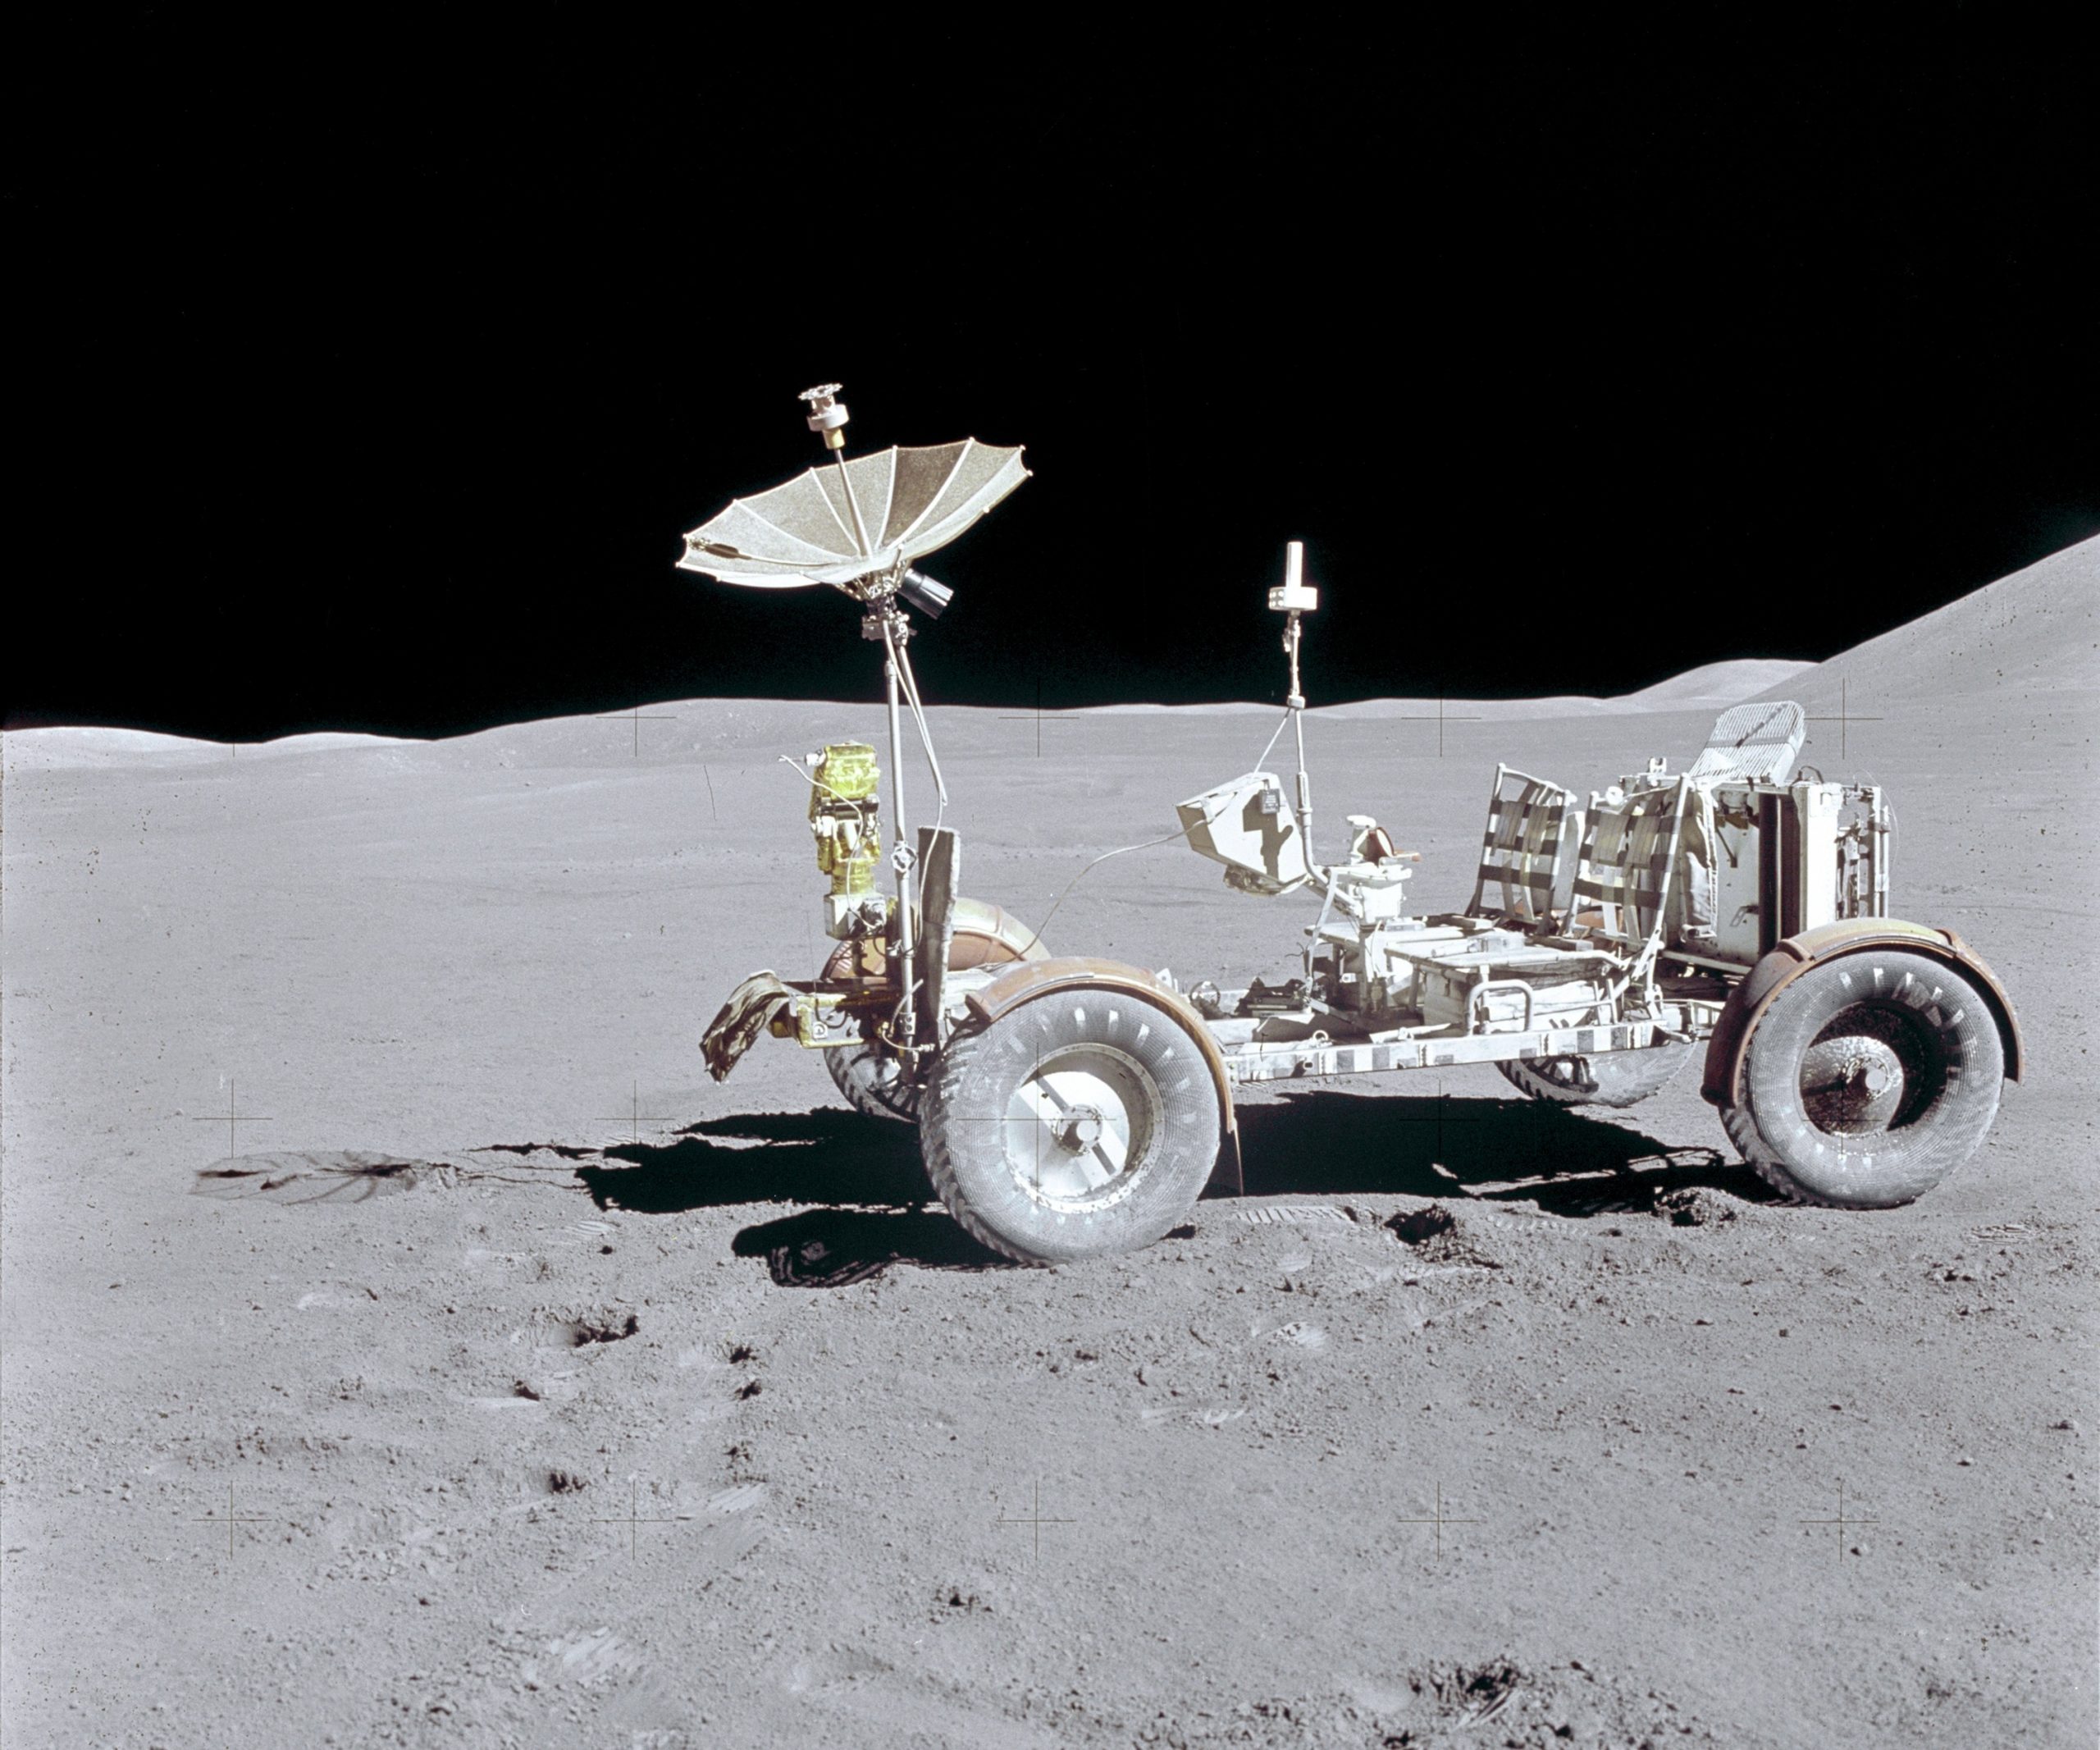 DELIVERY OF CARGO TO THE MOON